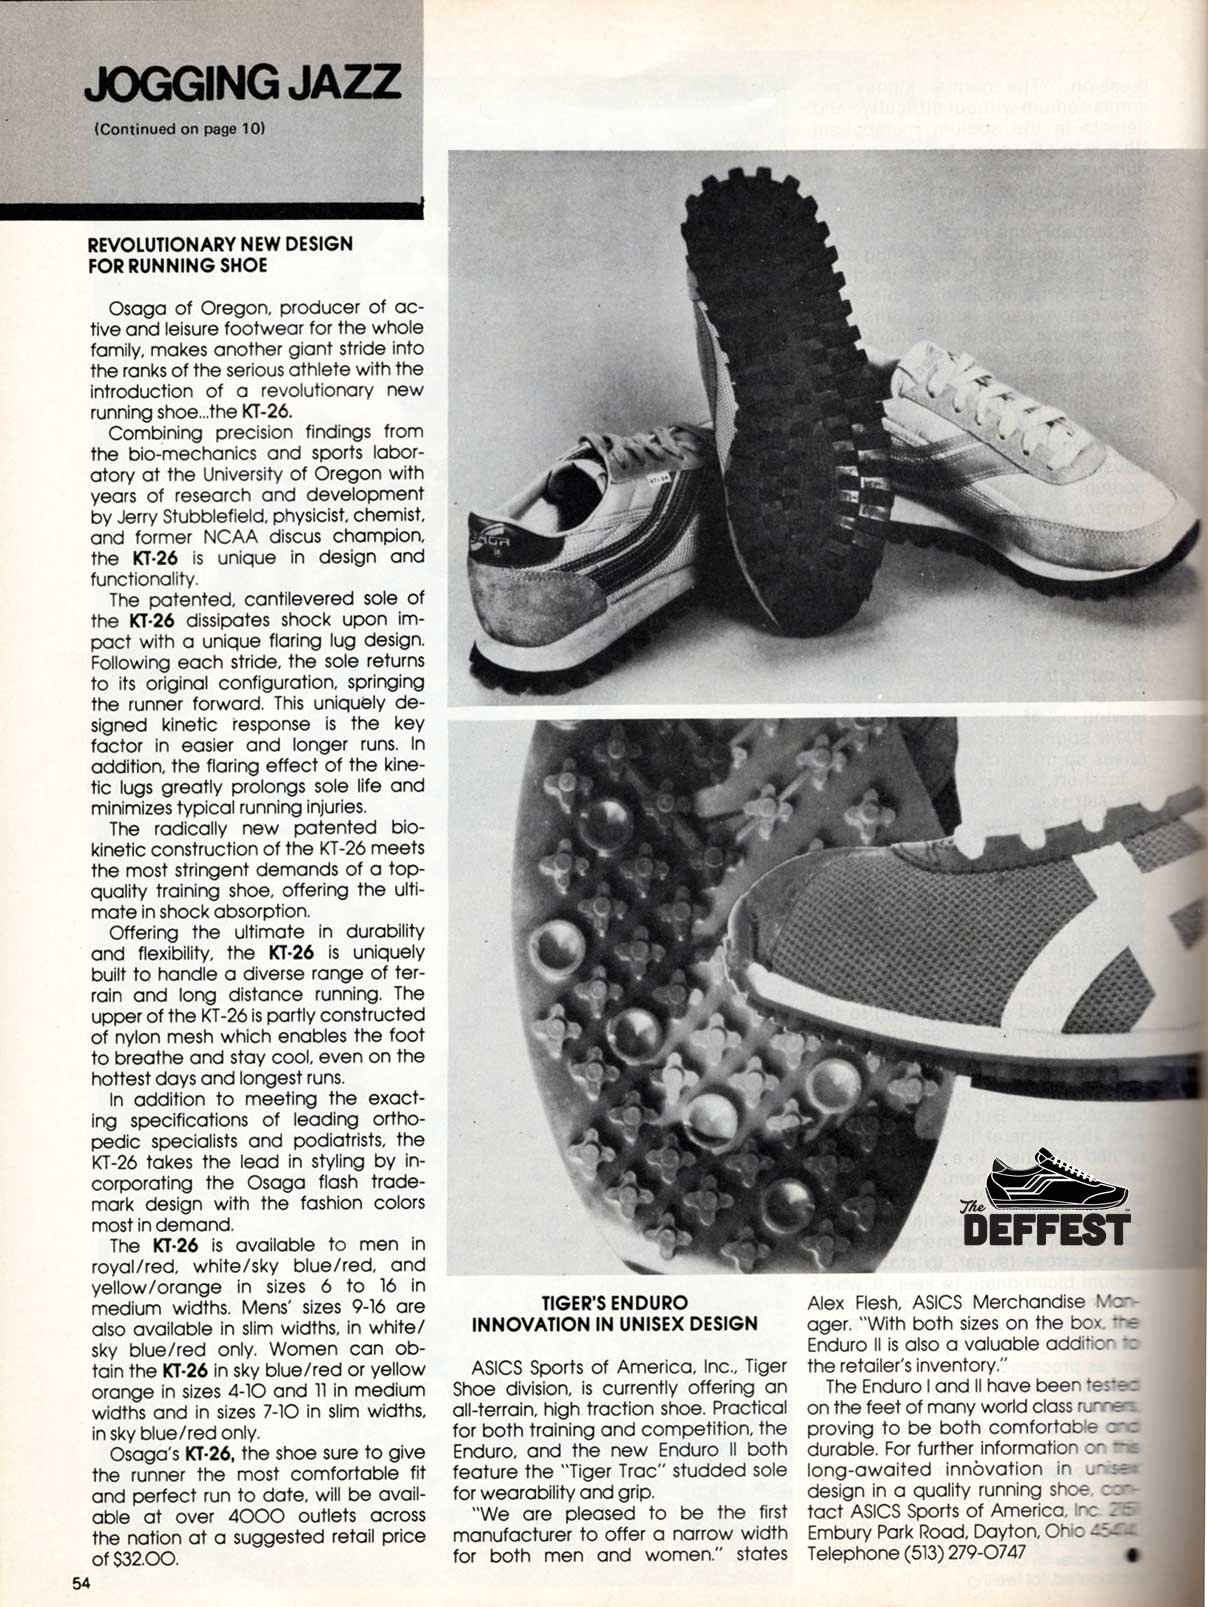 Today's Jogger April / May 1979 featuring the Osaga KT-26 and Tiger Enduro article